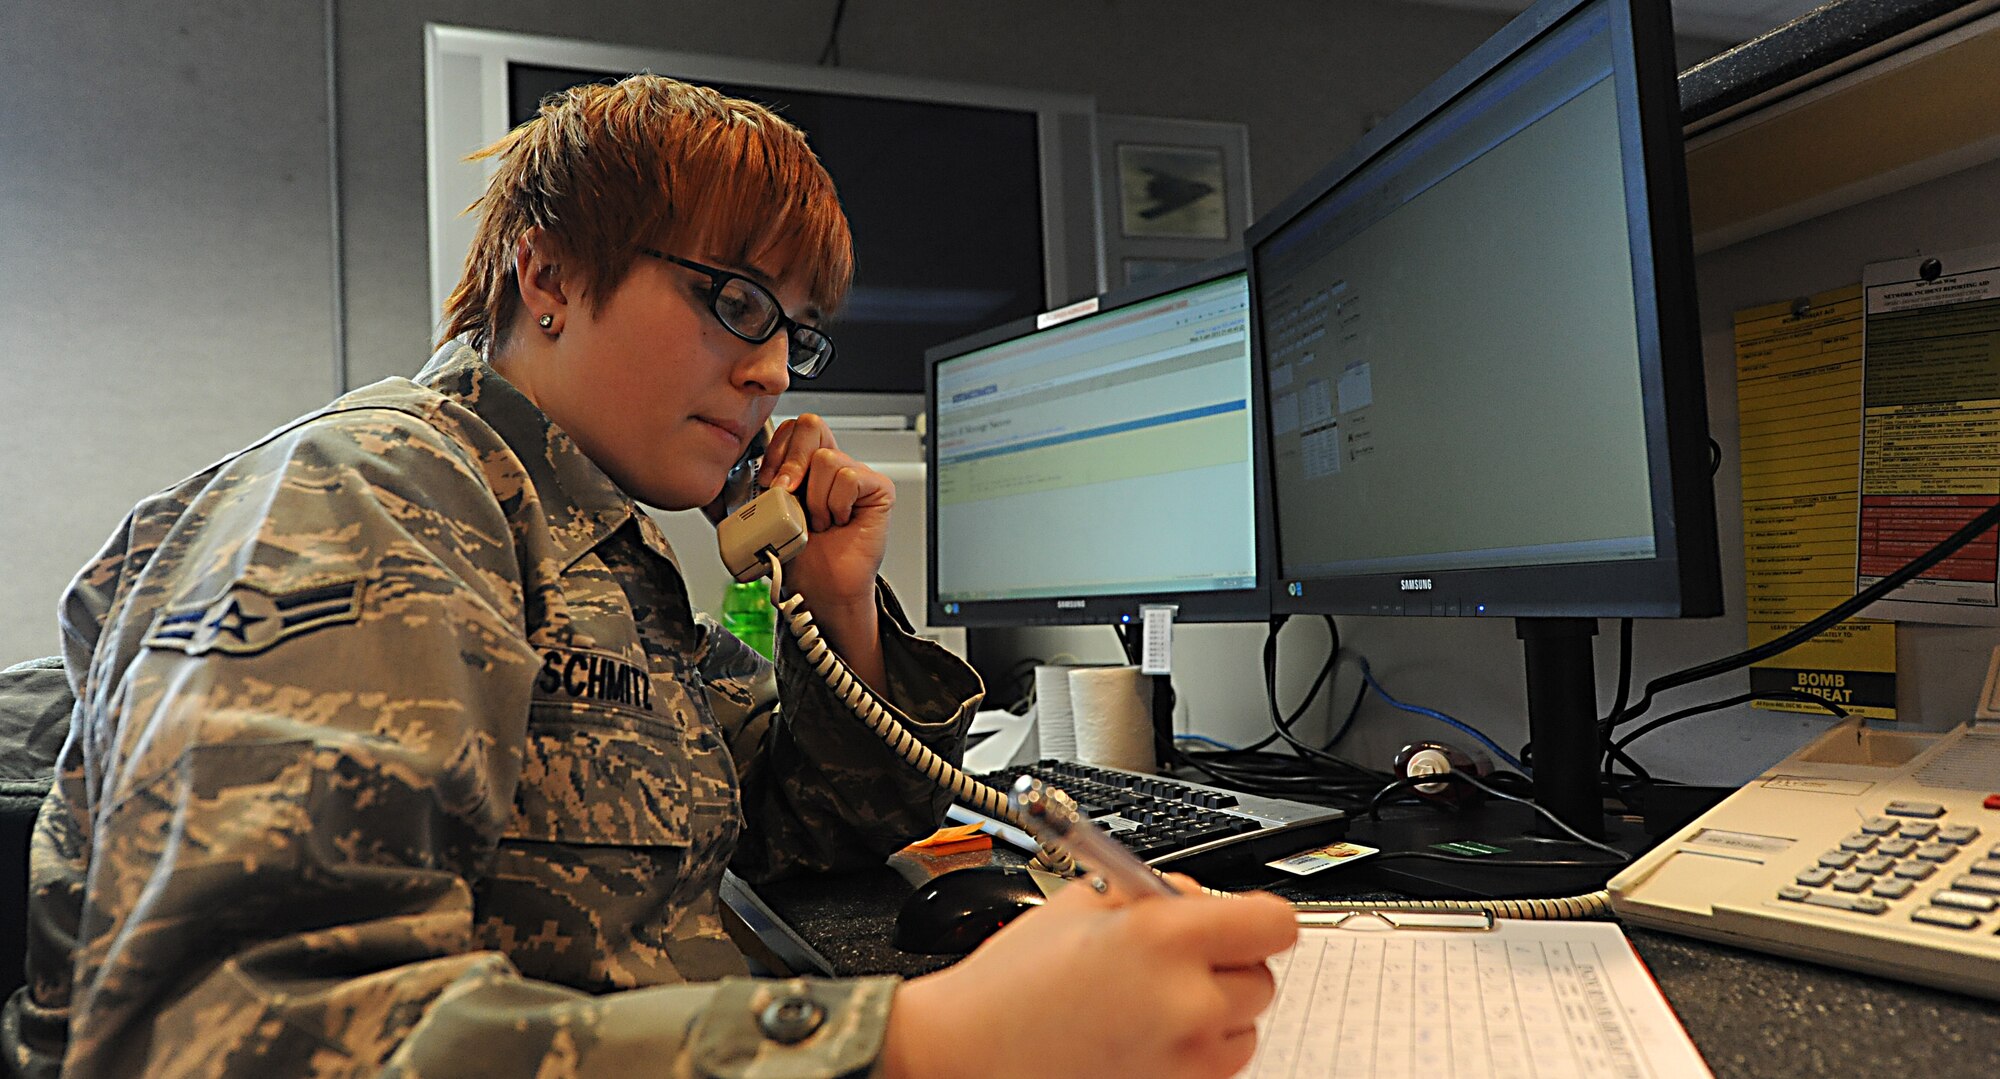 WHITEMAN AIR FORCE BASE, Mo. -- Airman 1st Class Hannah Schmitz, 509th Operations Support Squadron airfield management coordinator, receives a call from a supervisor informing her of a possible Bird Aircraft Strike Hazard, Jan. 9. Airfield management coordinators at Whiteman AFB keep the bird watch conditions updated and disperse about 50-100 species of birds. (U.S. Air Force photo/Staff Sgt. Nick Wilson) (Released)